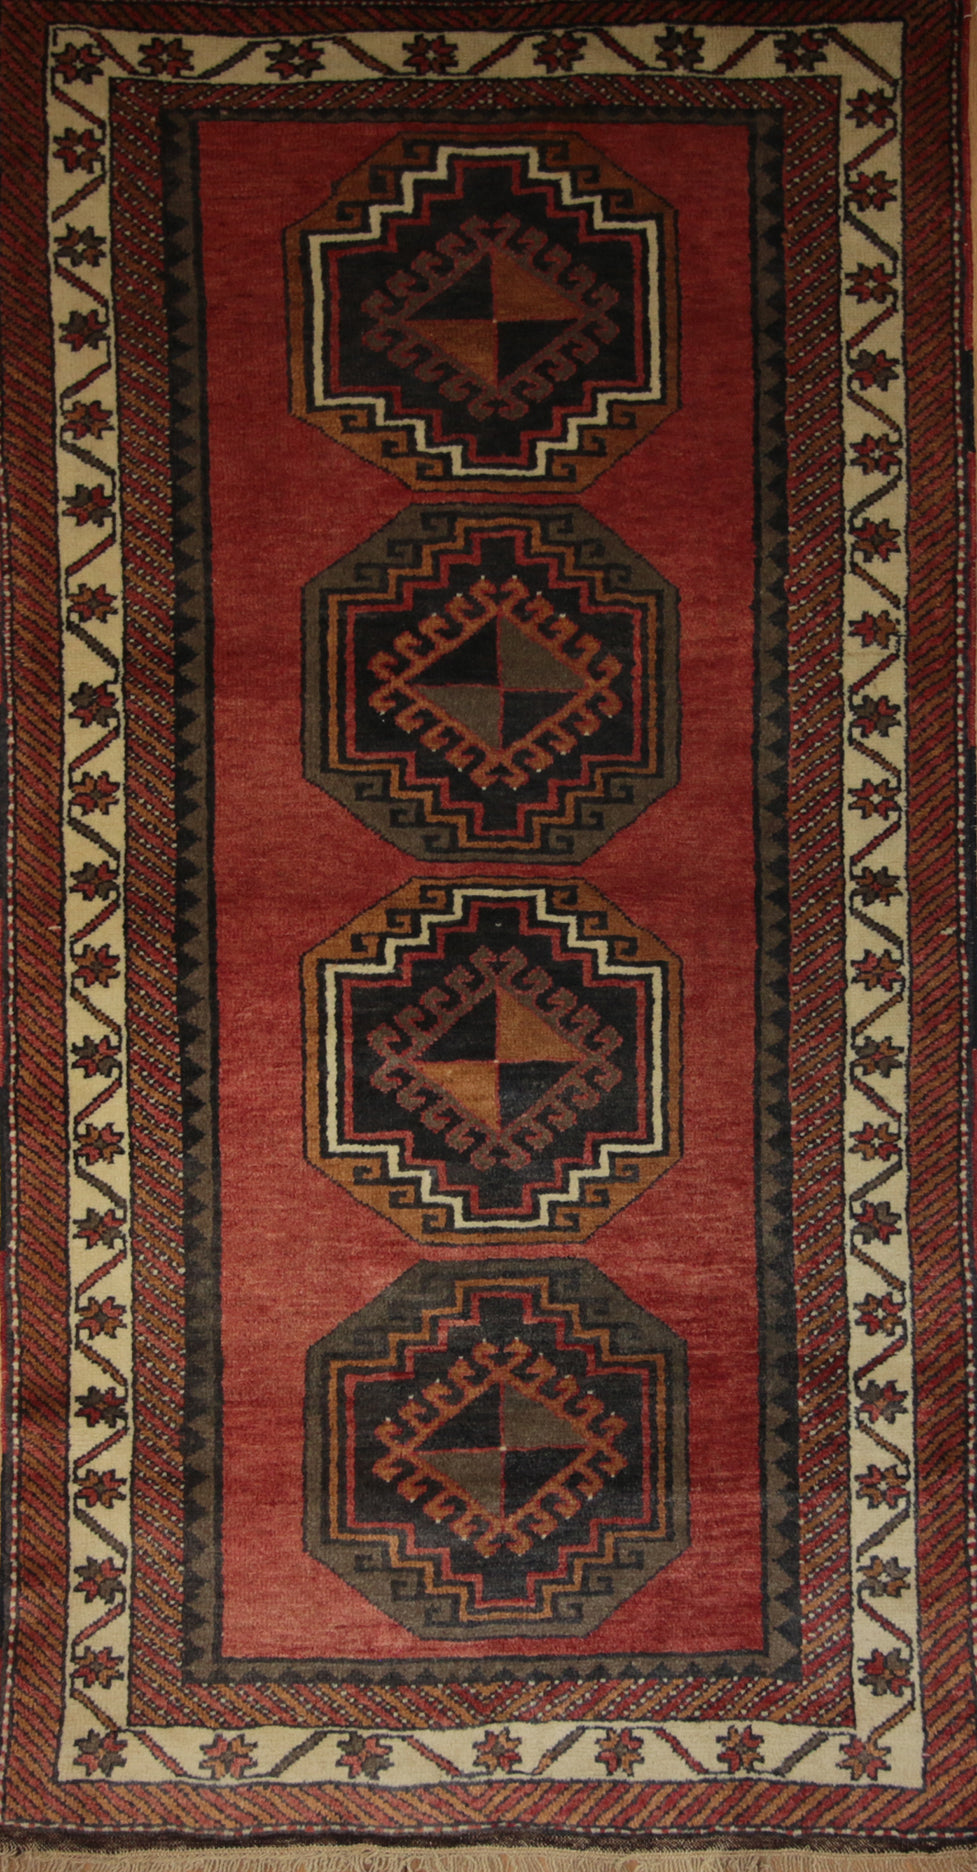 Vegetable Dye Red Anatolian Turkish Rug 3x5 One of a Kind